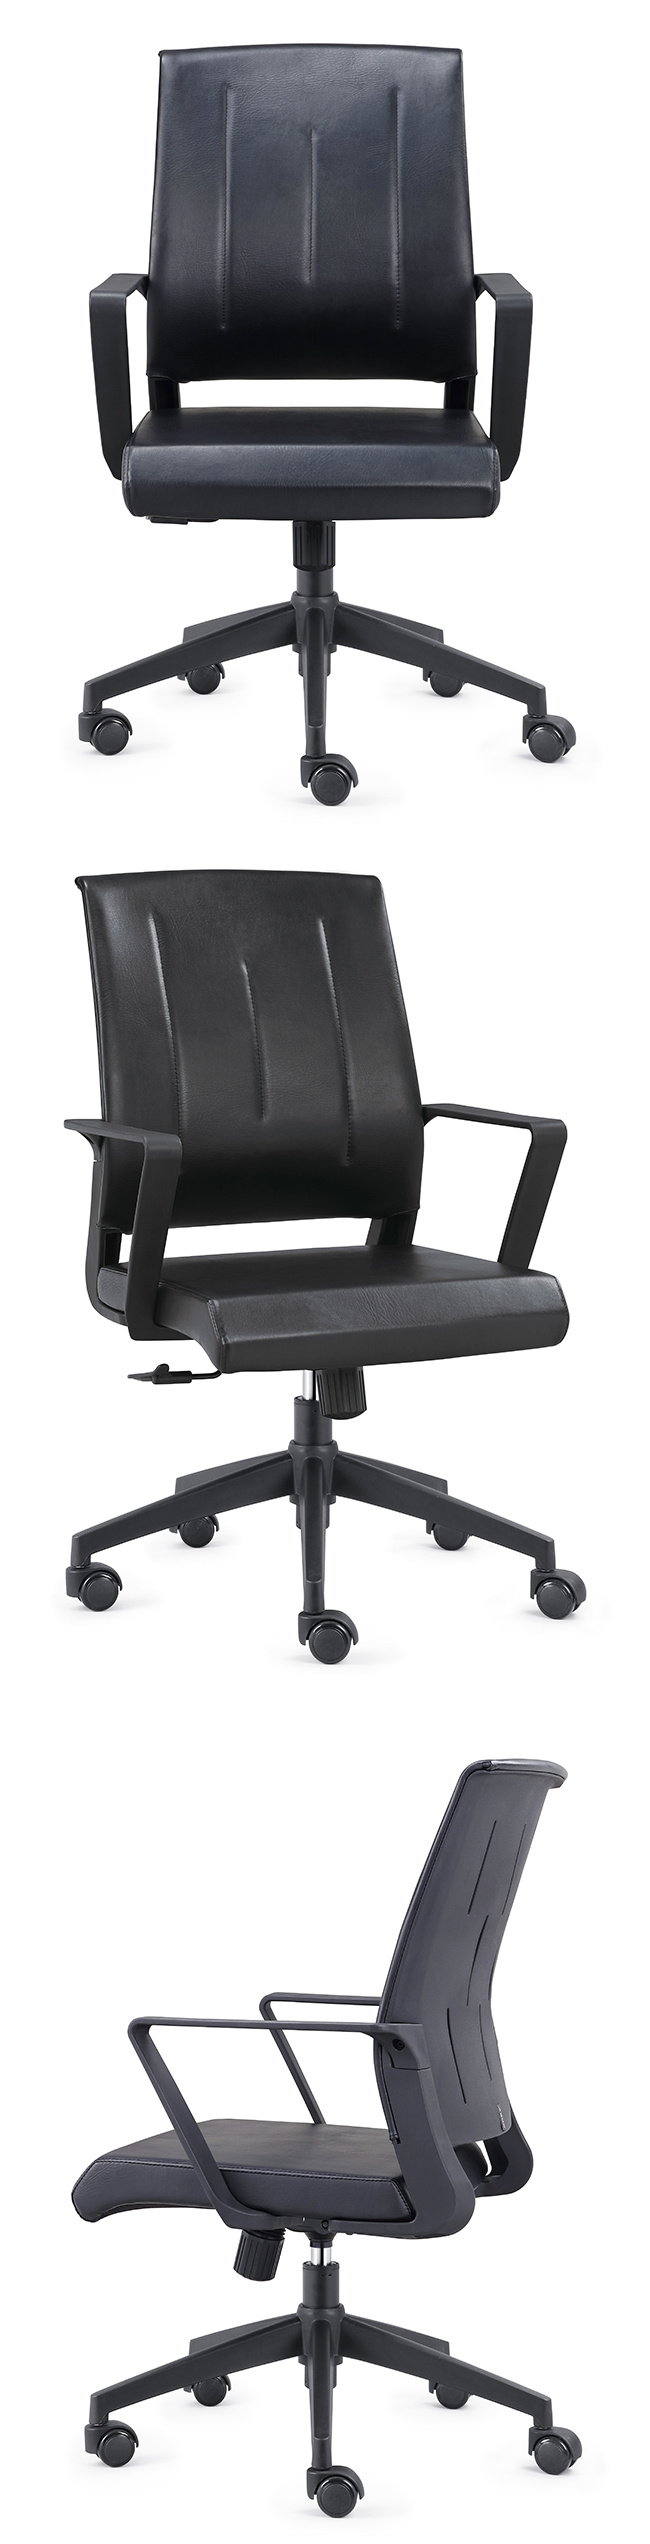 Swivel Revolving Manager PU Leather Executive Office Chair